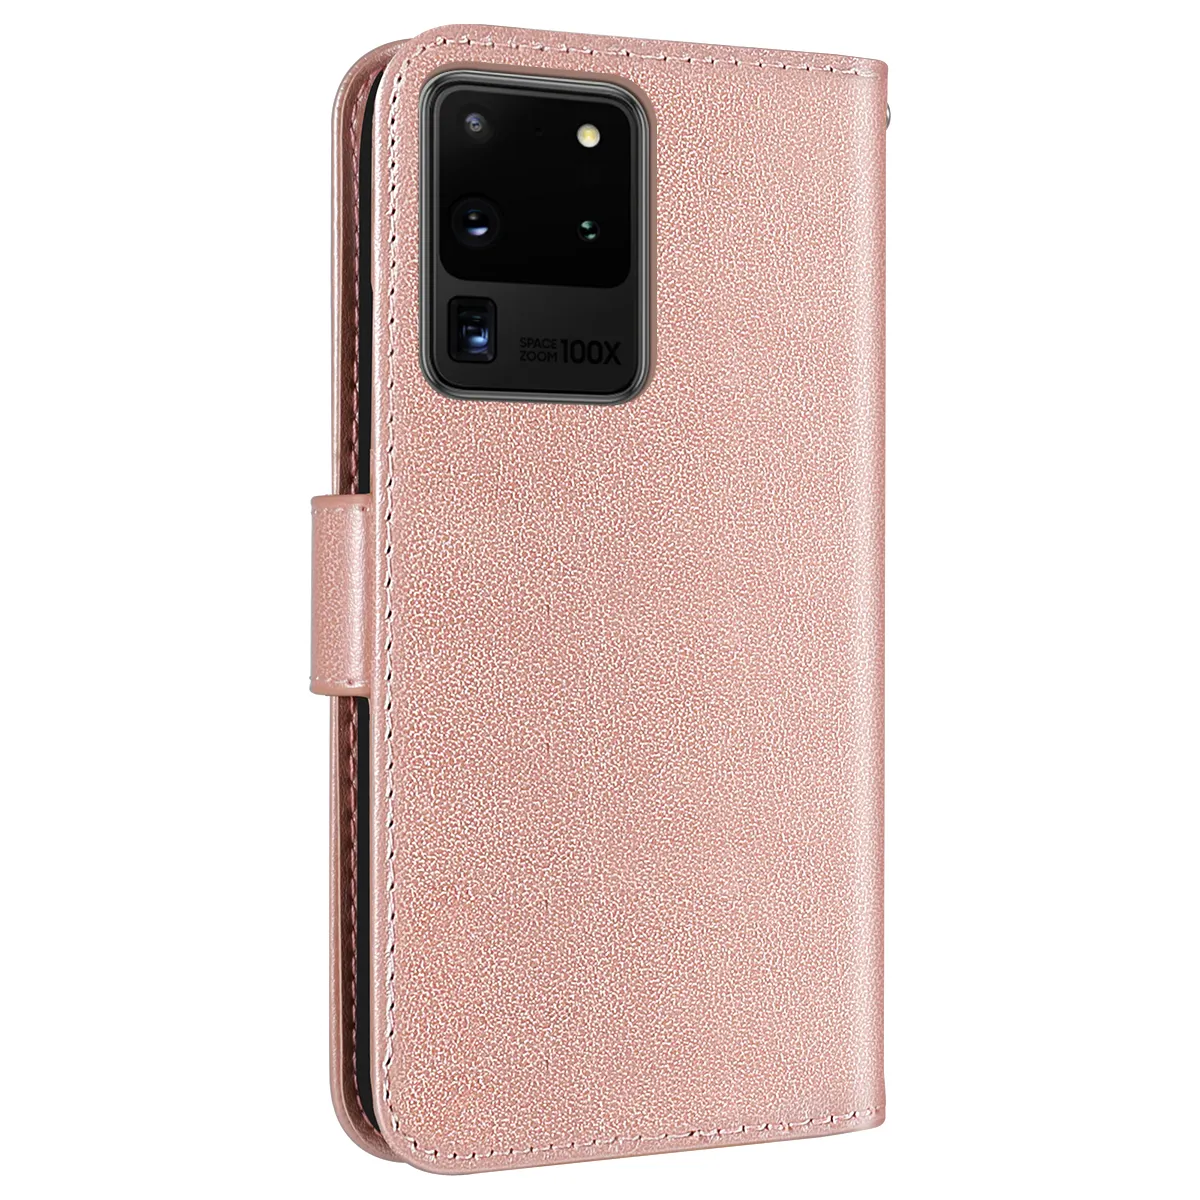 New magnetic card pu leather phone cases For samsung phones galaxy A10 A20 A40 A50 Note10 20 customize cell phone case